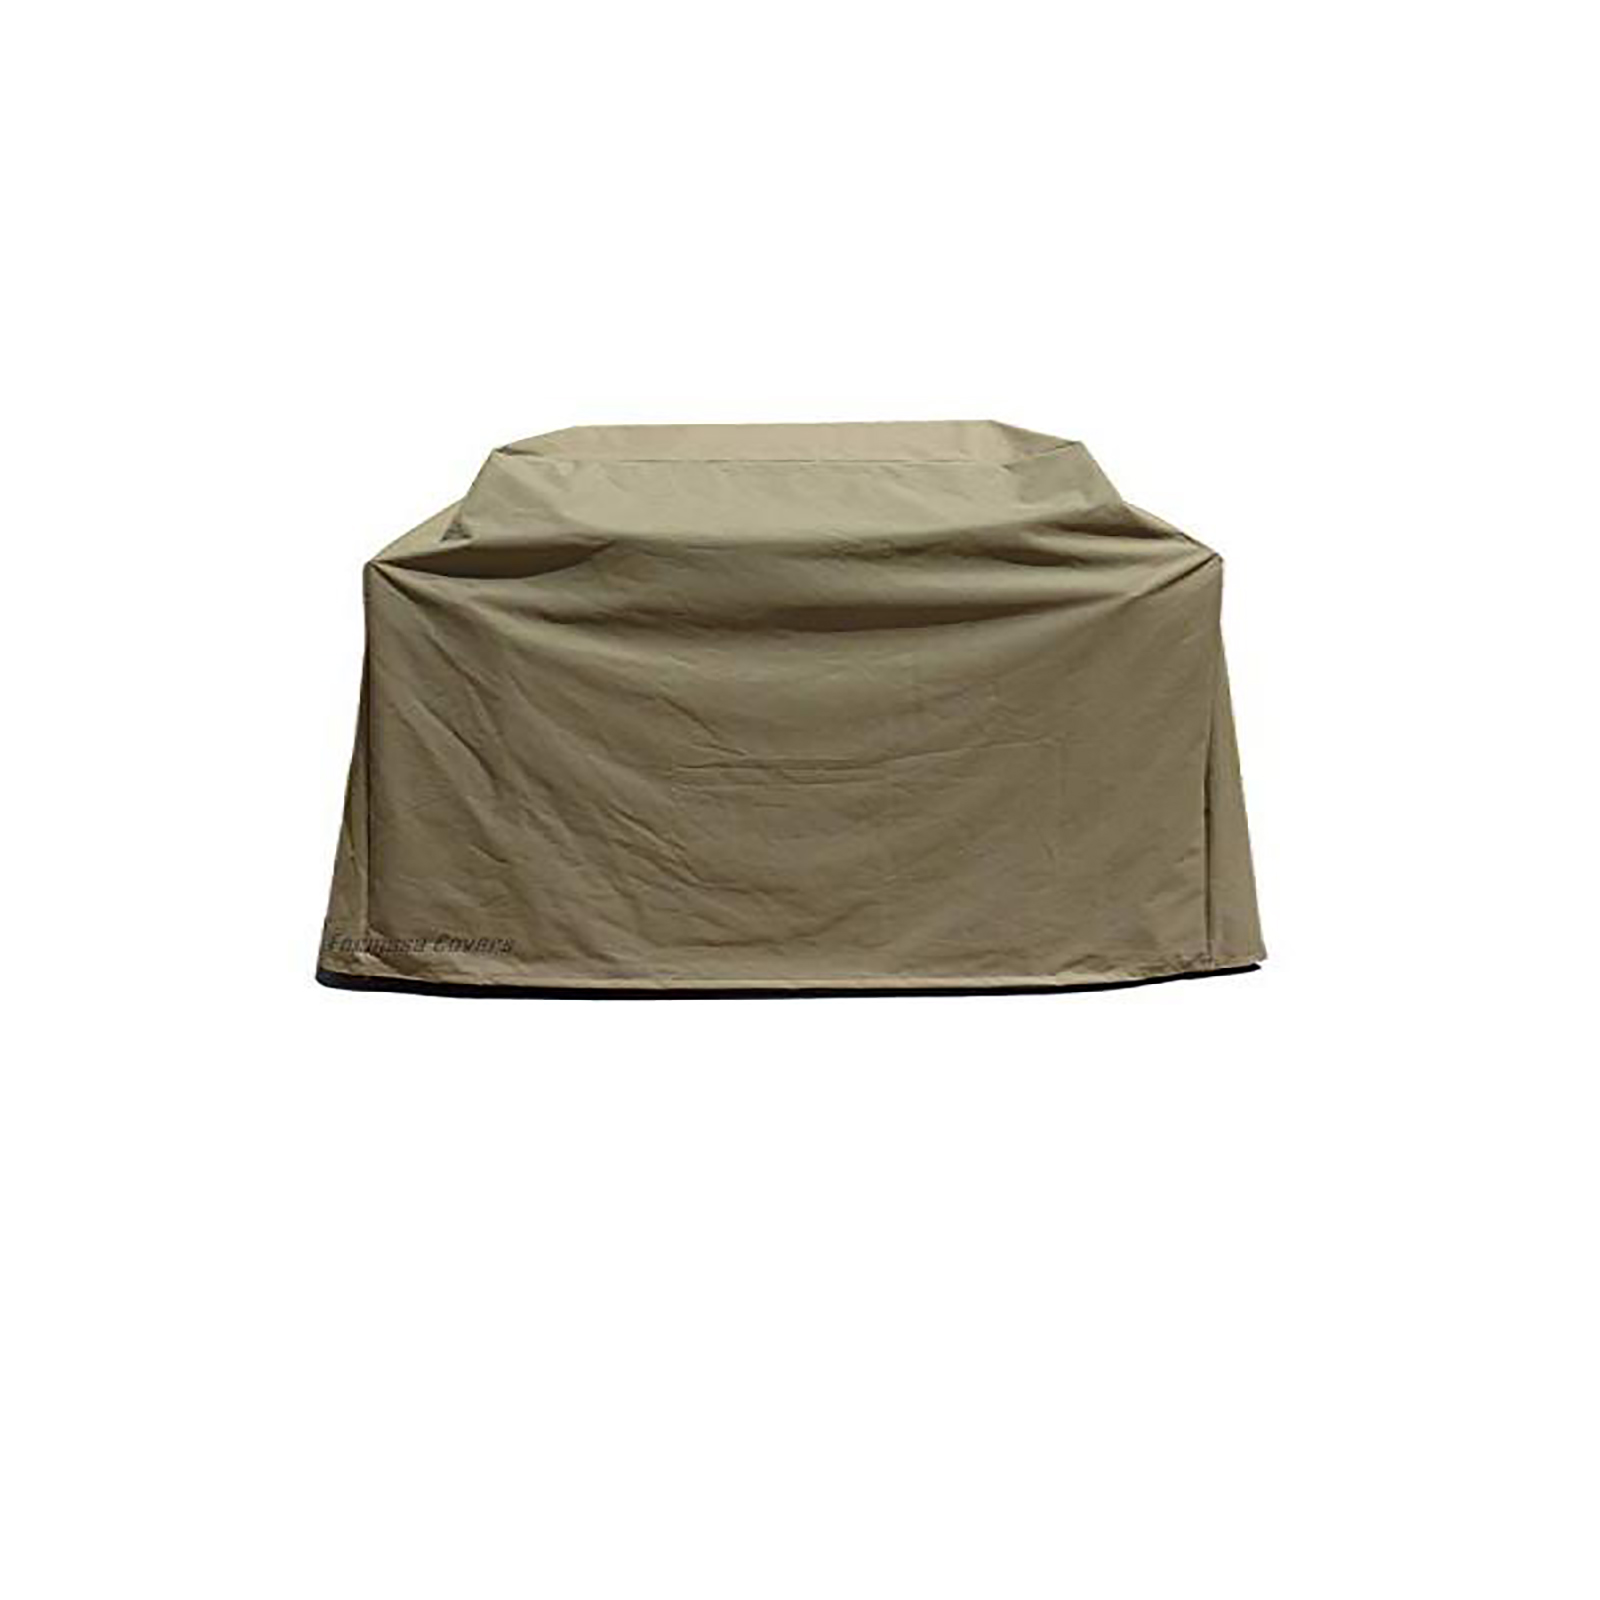 Formosa Covers 67" Premium Heavy Gauge BBQ Grill Cover - Taupe